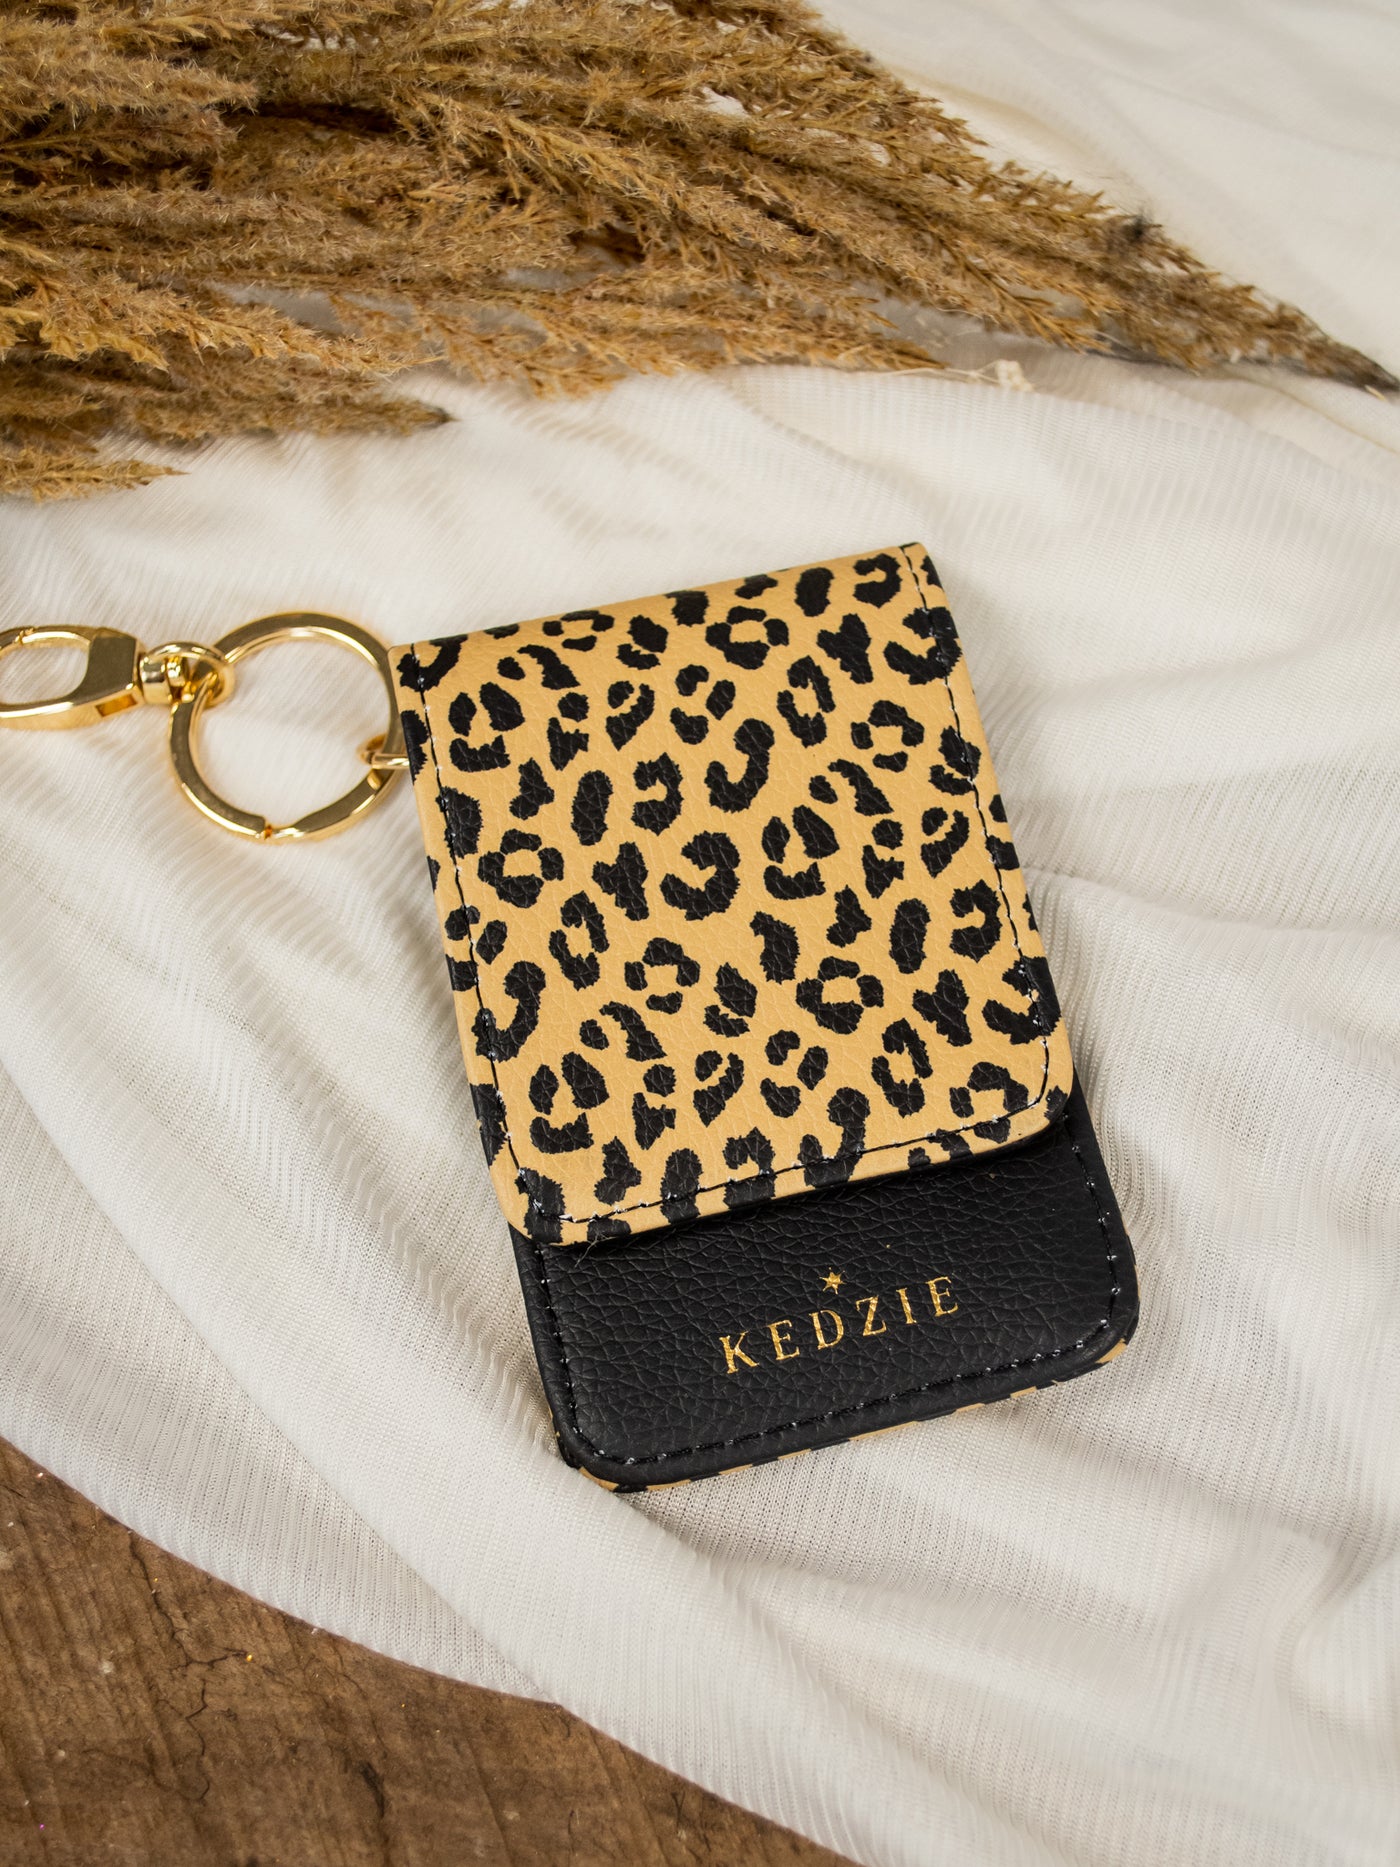 A leopard and black id holder keychain.